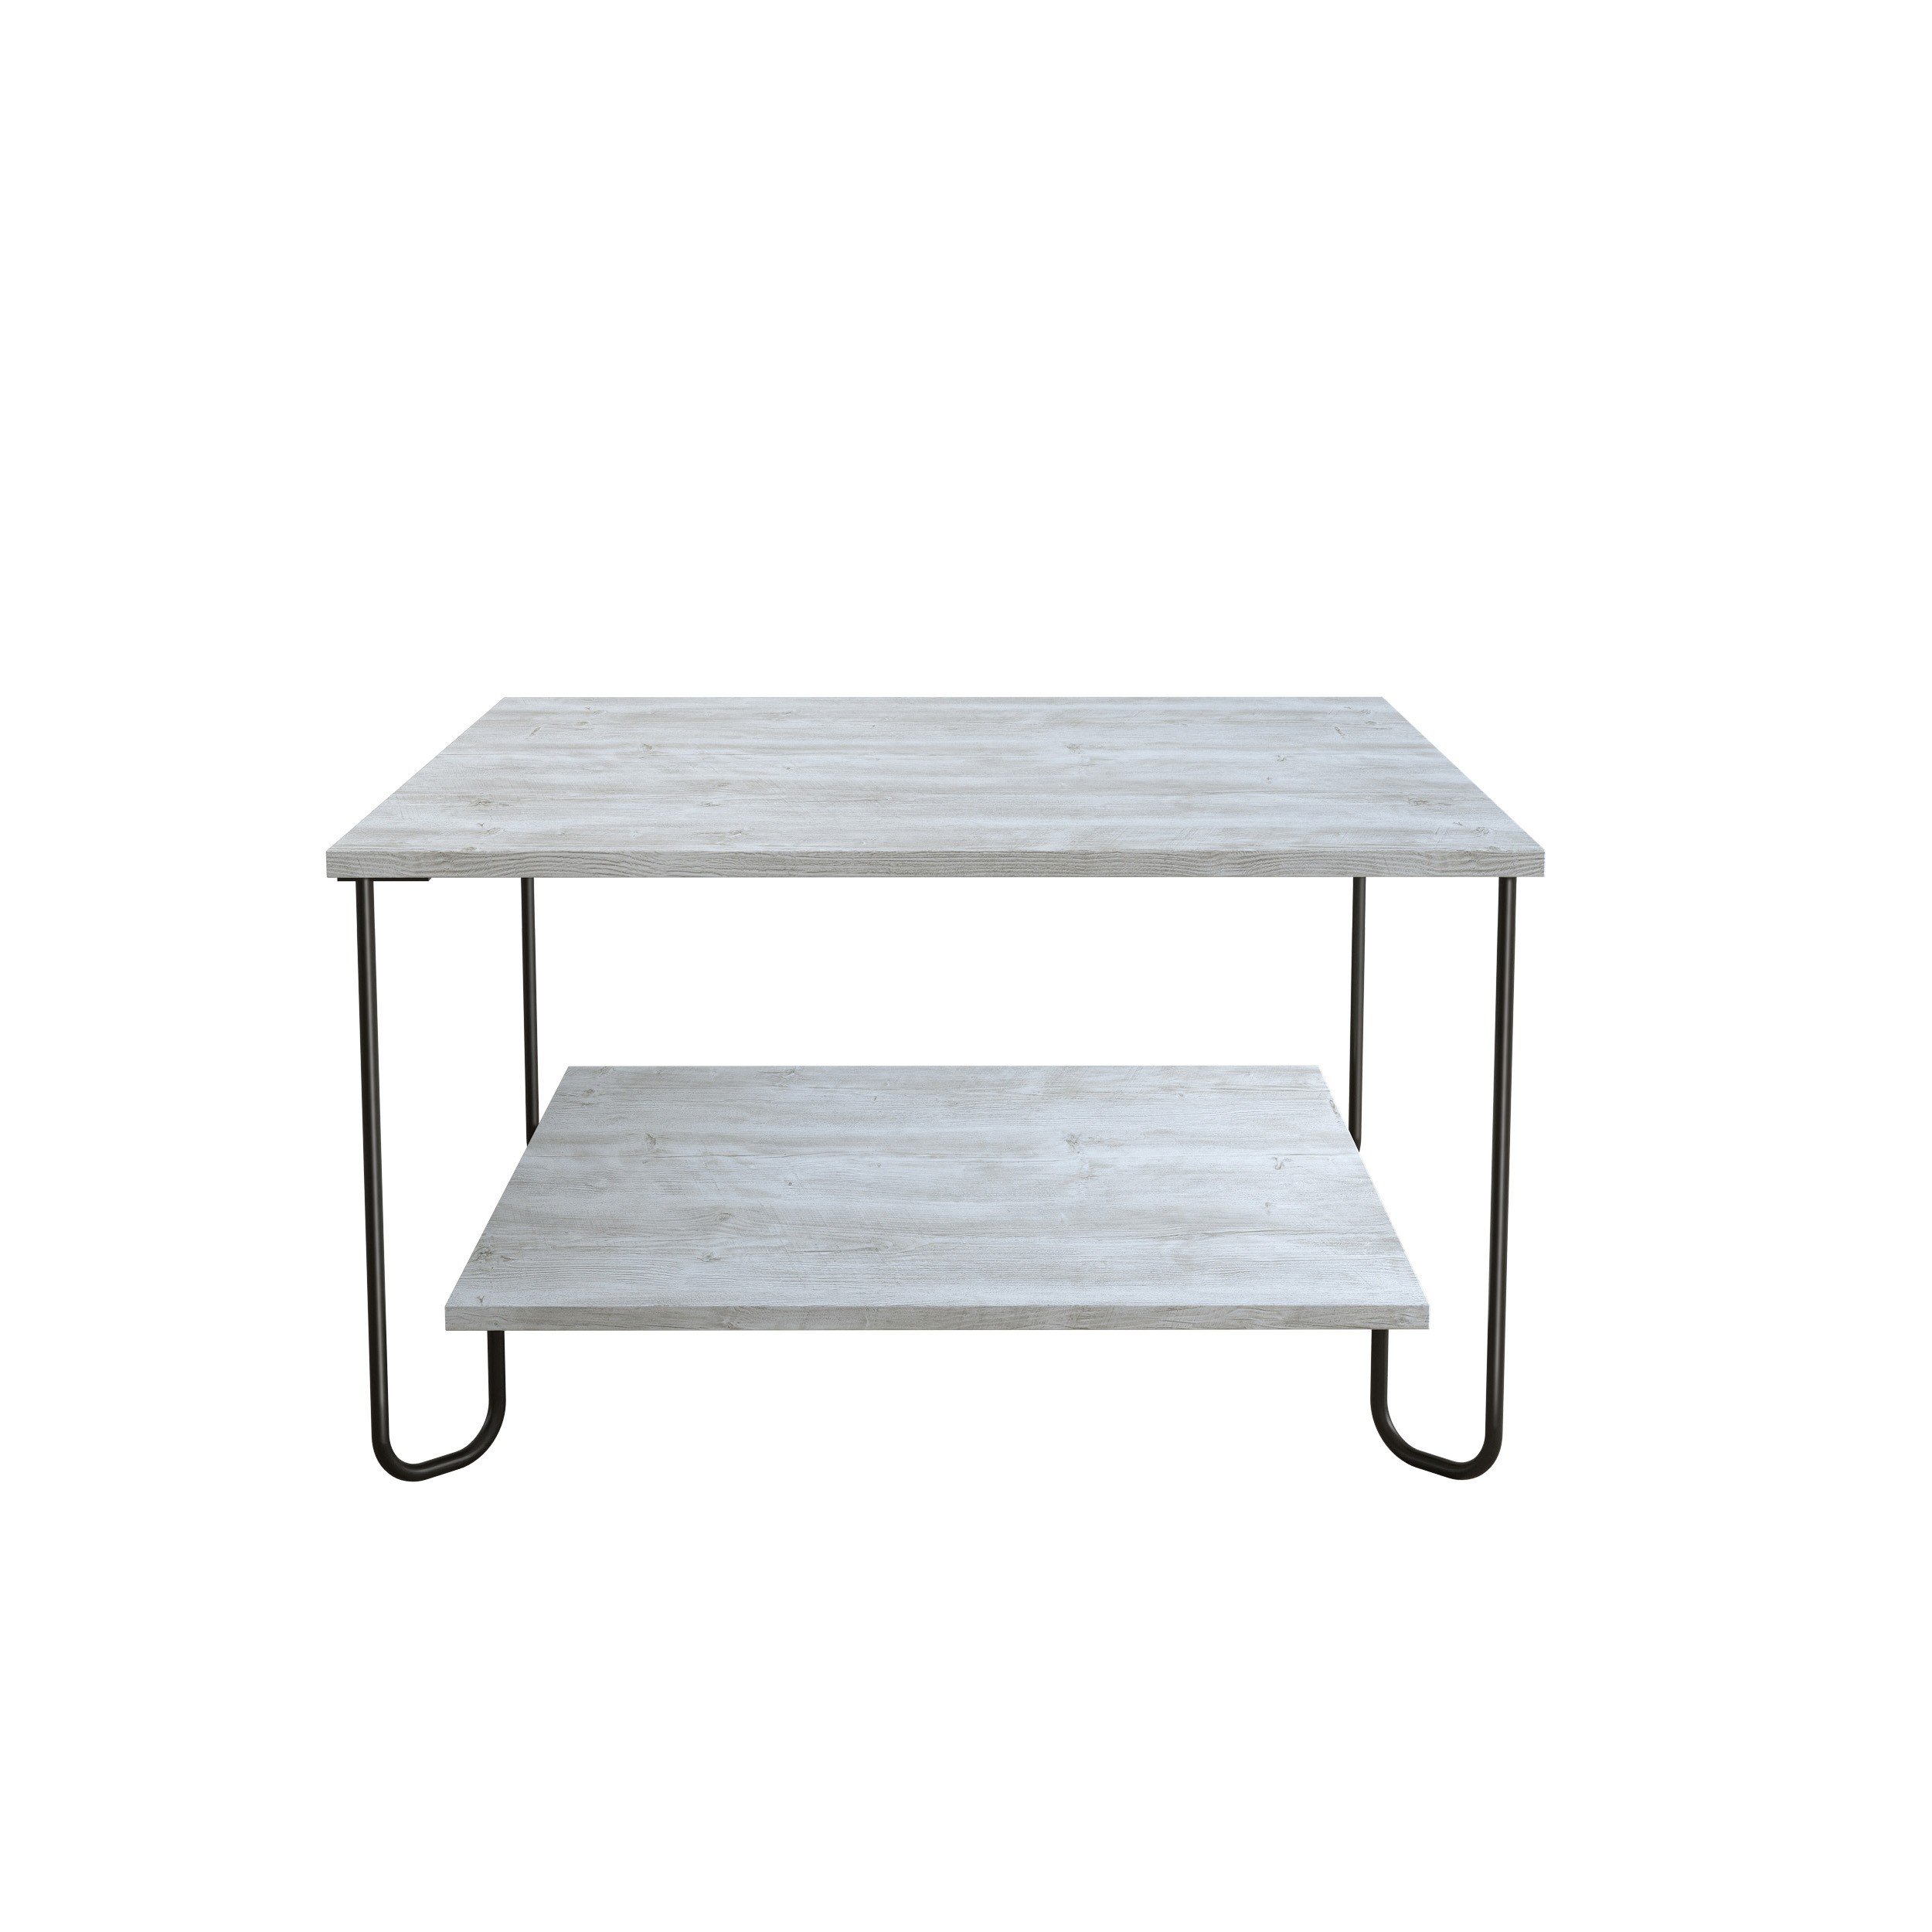 MARBO COFFEE TABLE - ANCIENT WHITE - M.SH.20964.2